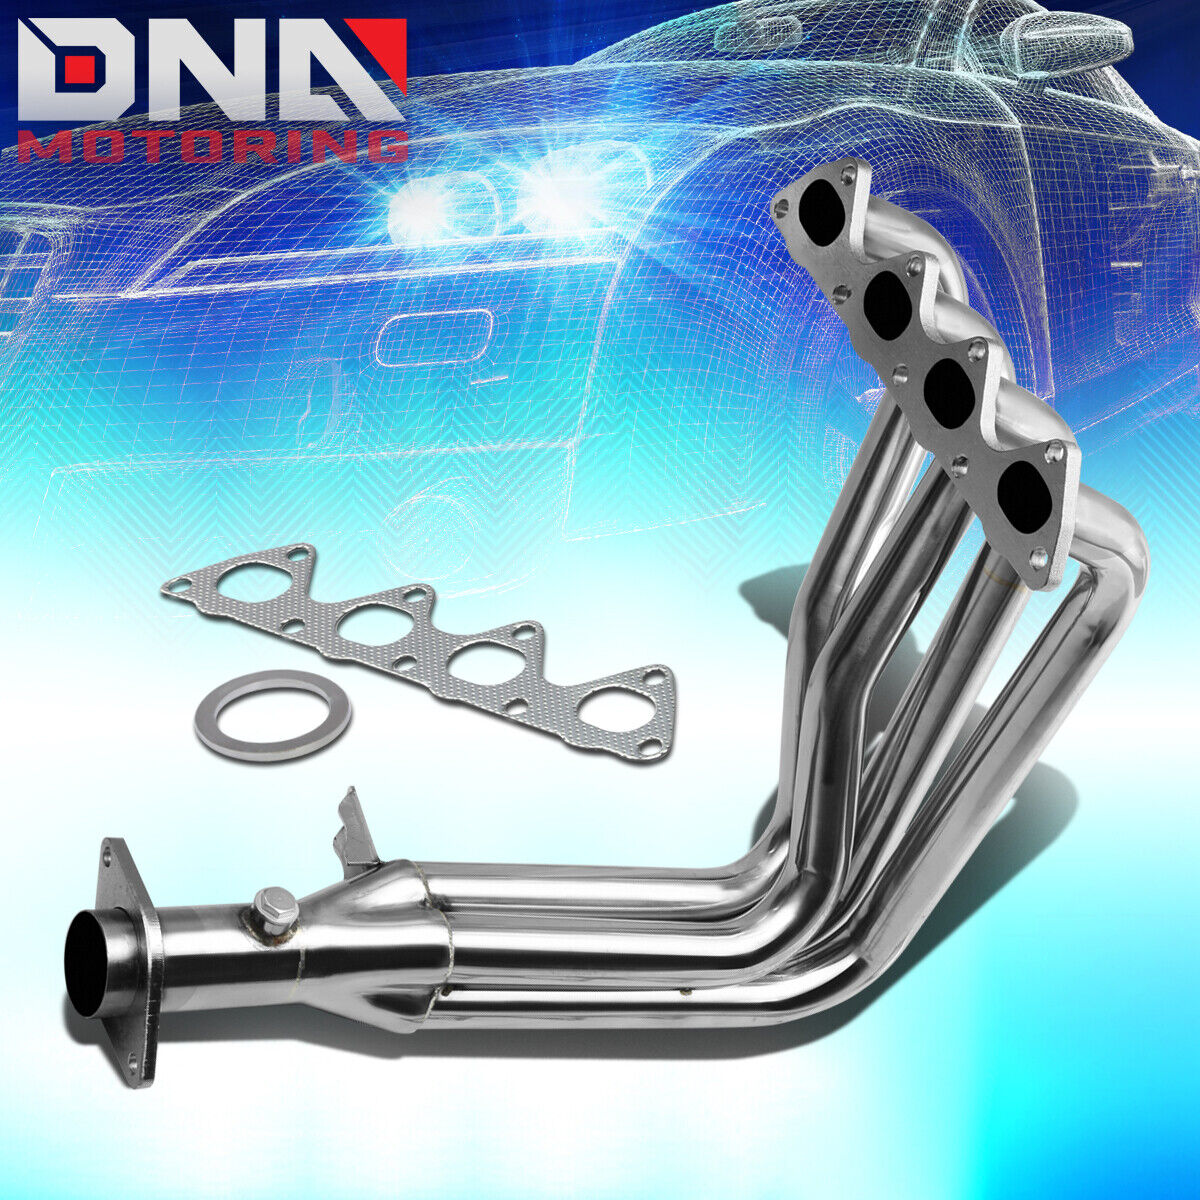 STAINLESS STEEL 4-1 HEADER FOR 99-00 CIVIC Si/DEL SOL VTEC 1.6L EXHAUST/MANIFOLD